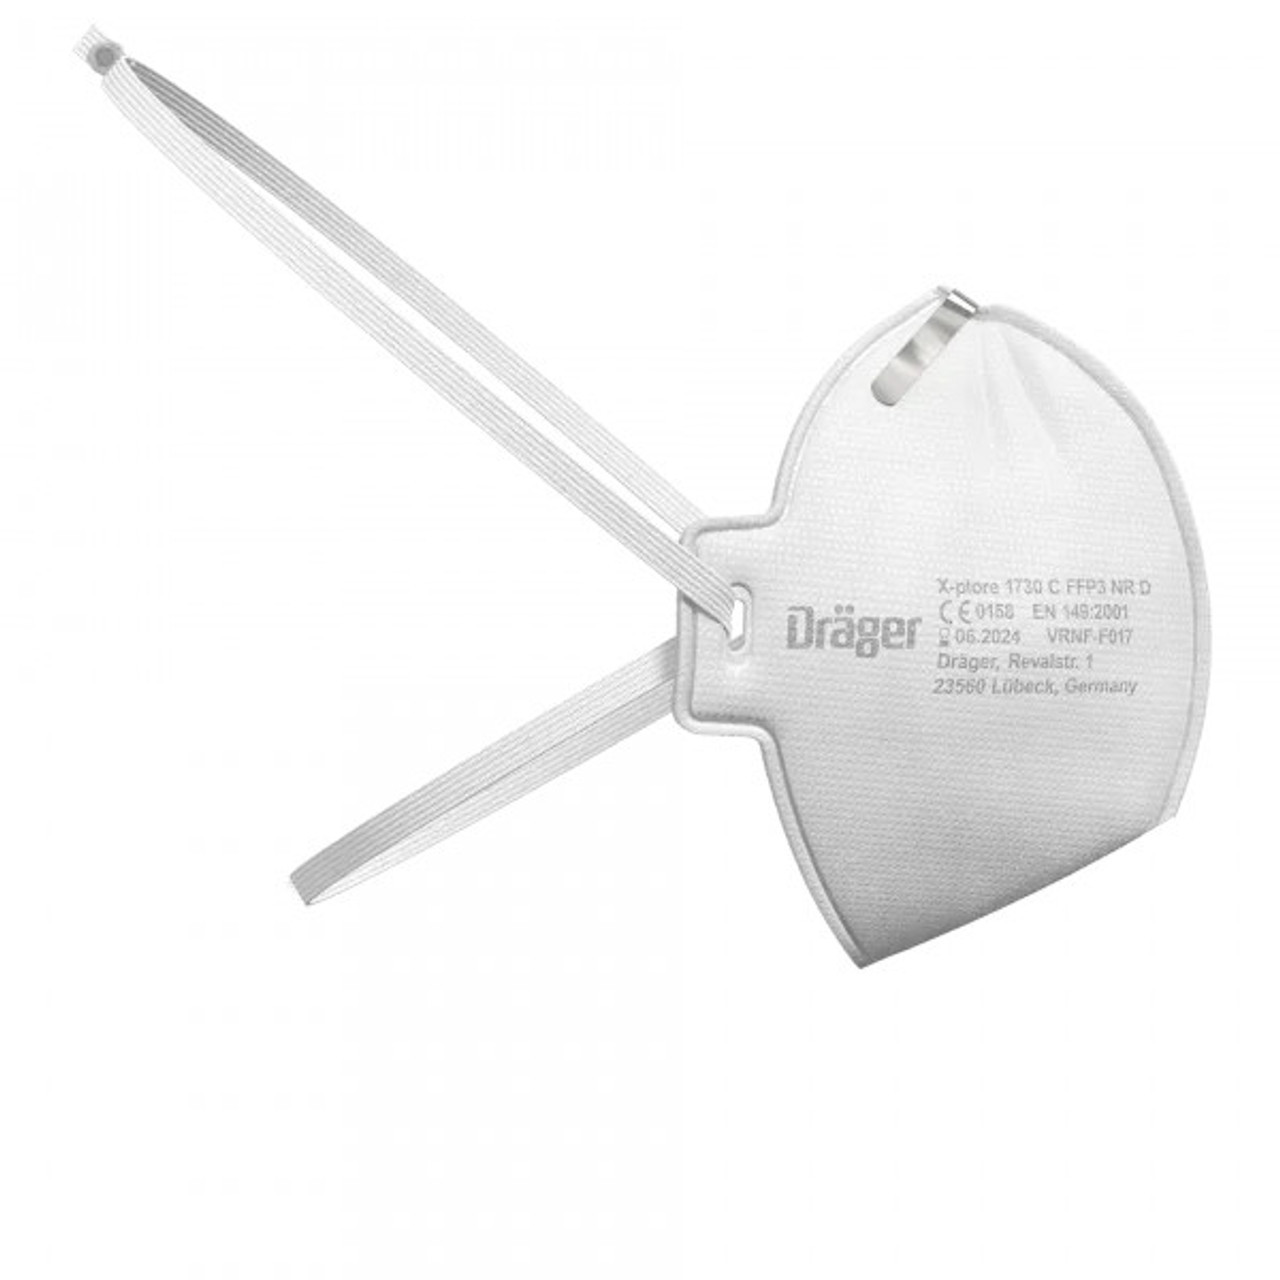 Righthand side of the Drager X-plore 1730 FFP3 Unvalved Respirator Mask